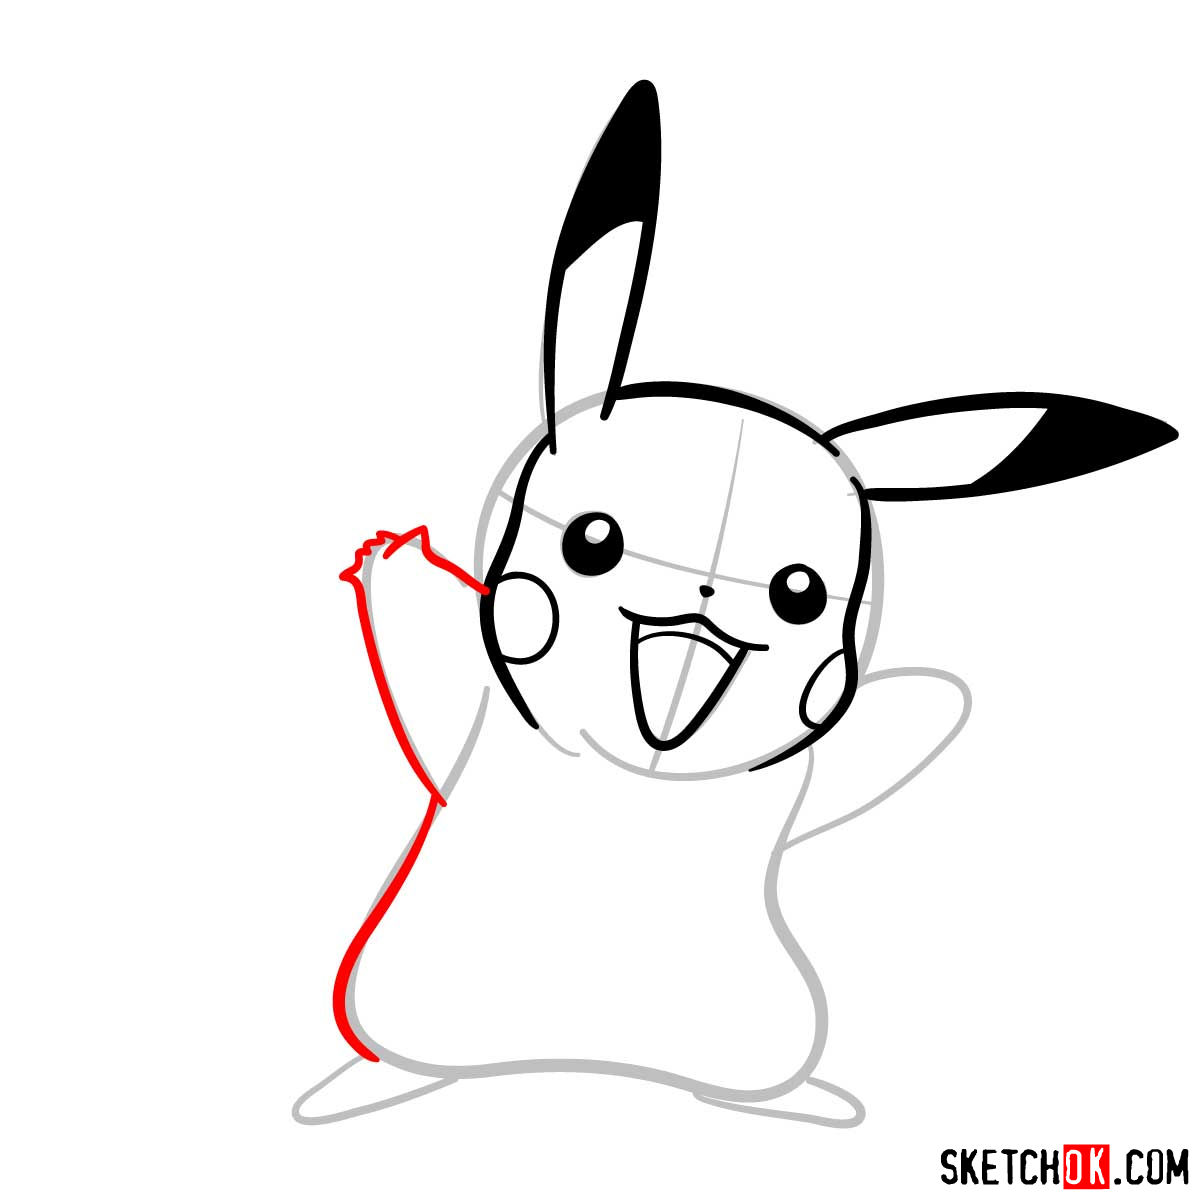 How to draw Pikachu Pokemon with arms wide open - step 06